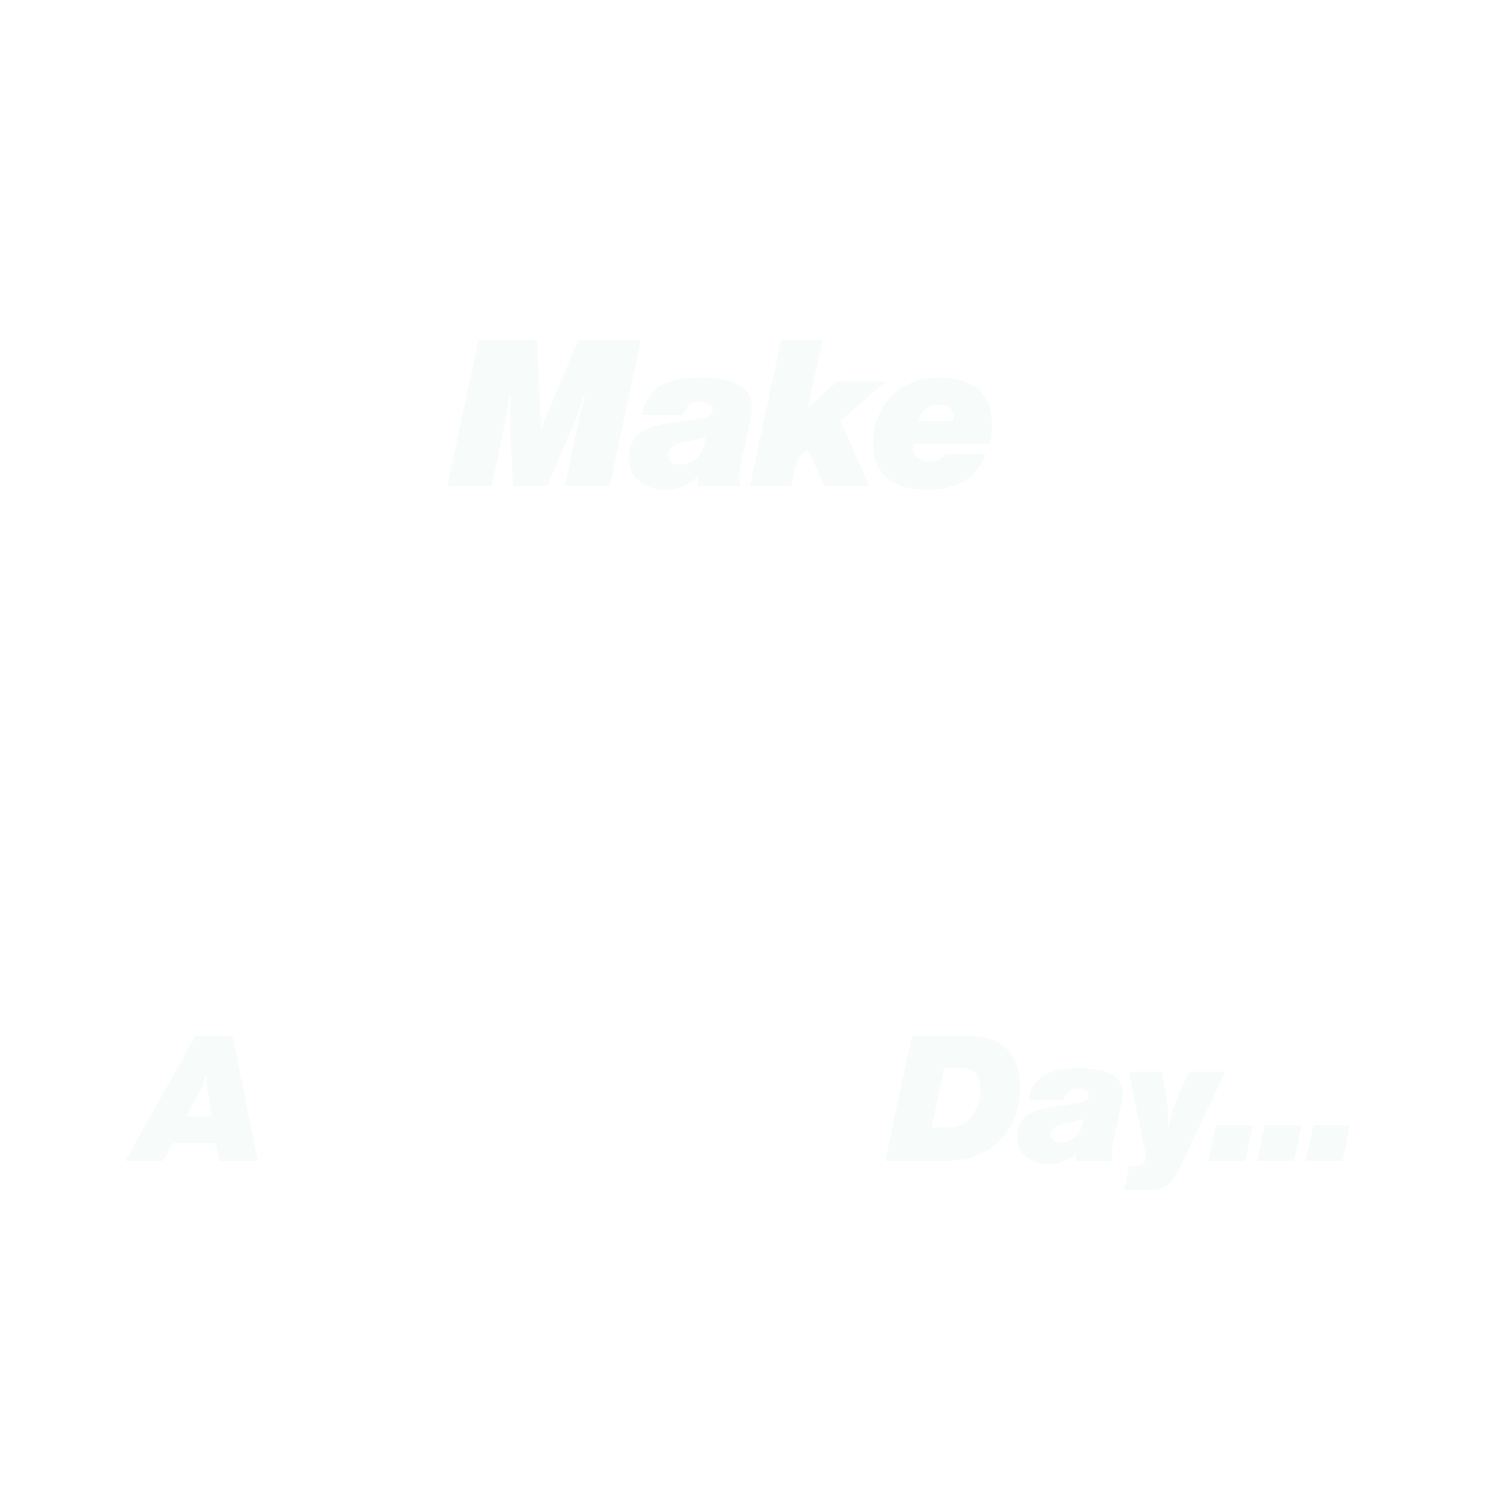 Make Moving Day a Good Day